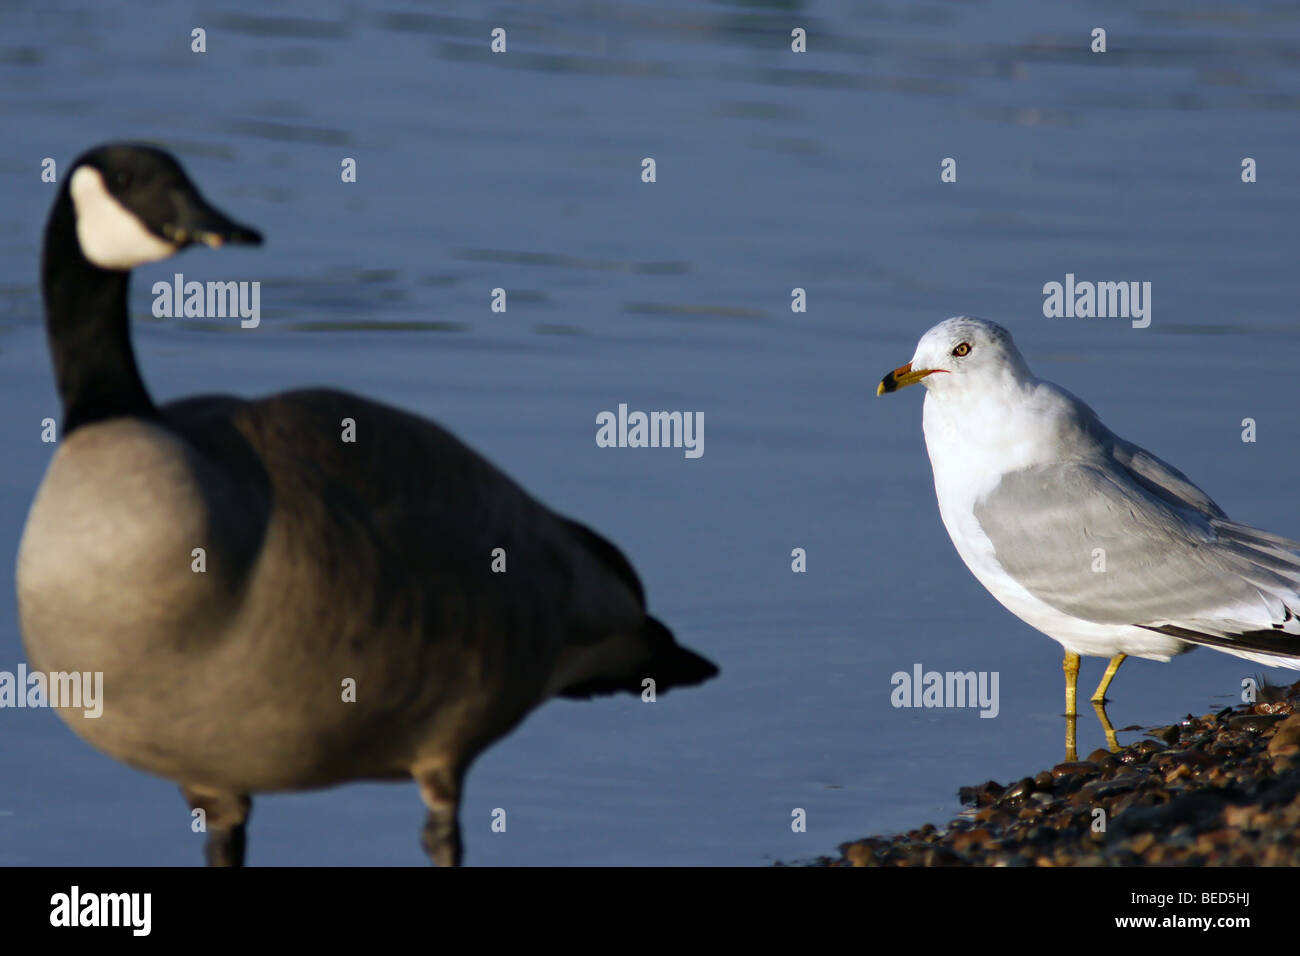 Seagull glaring at a Canadian goose, looking angry. Stock Photo